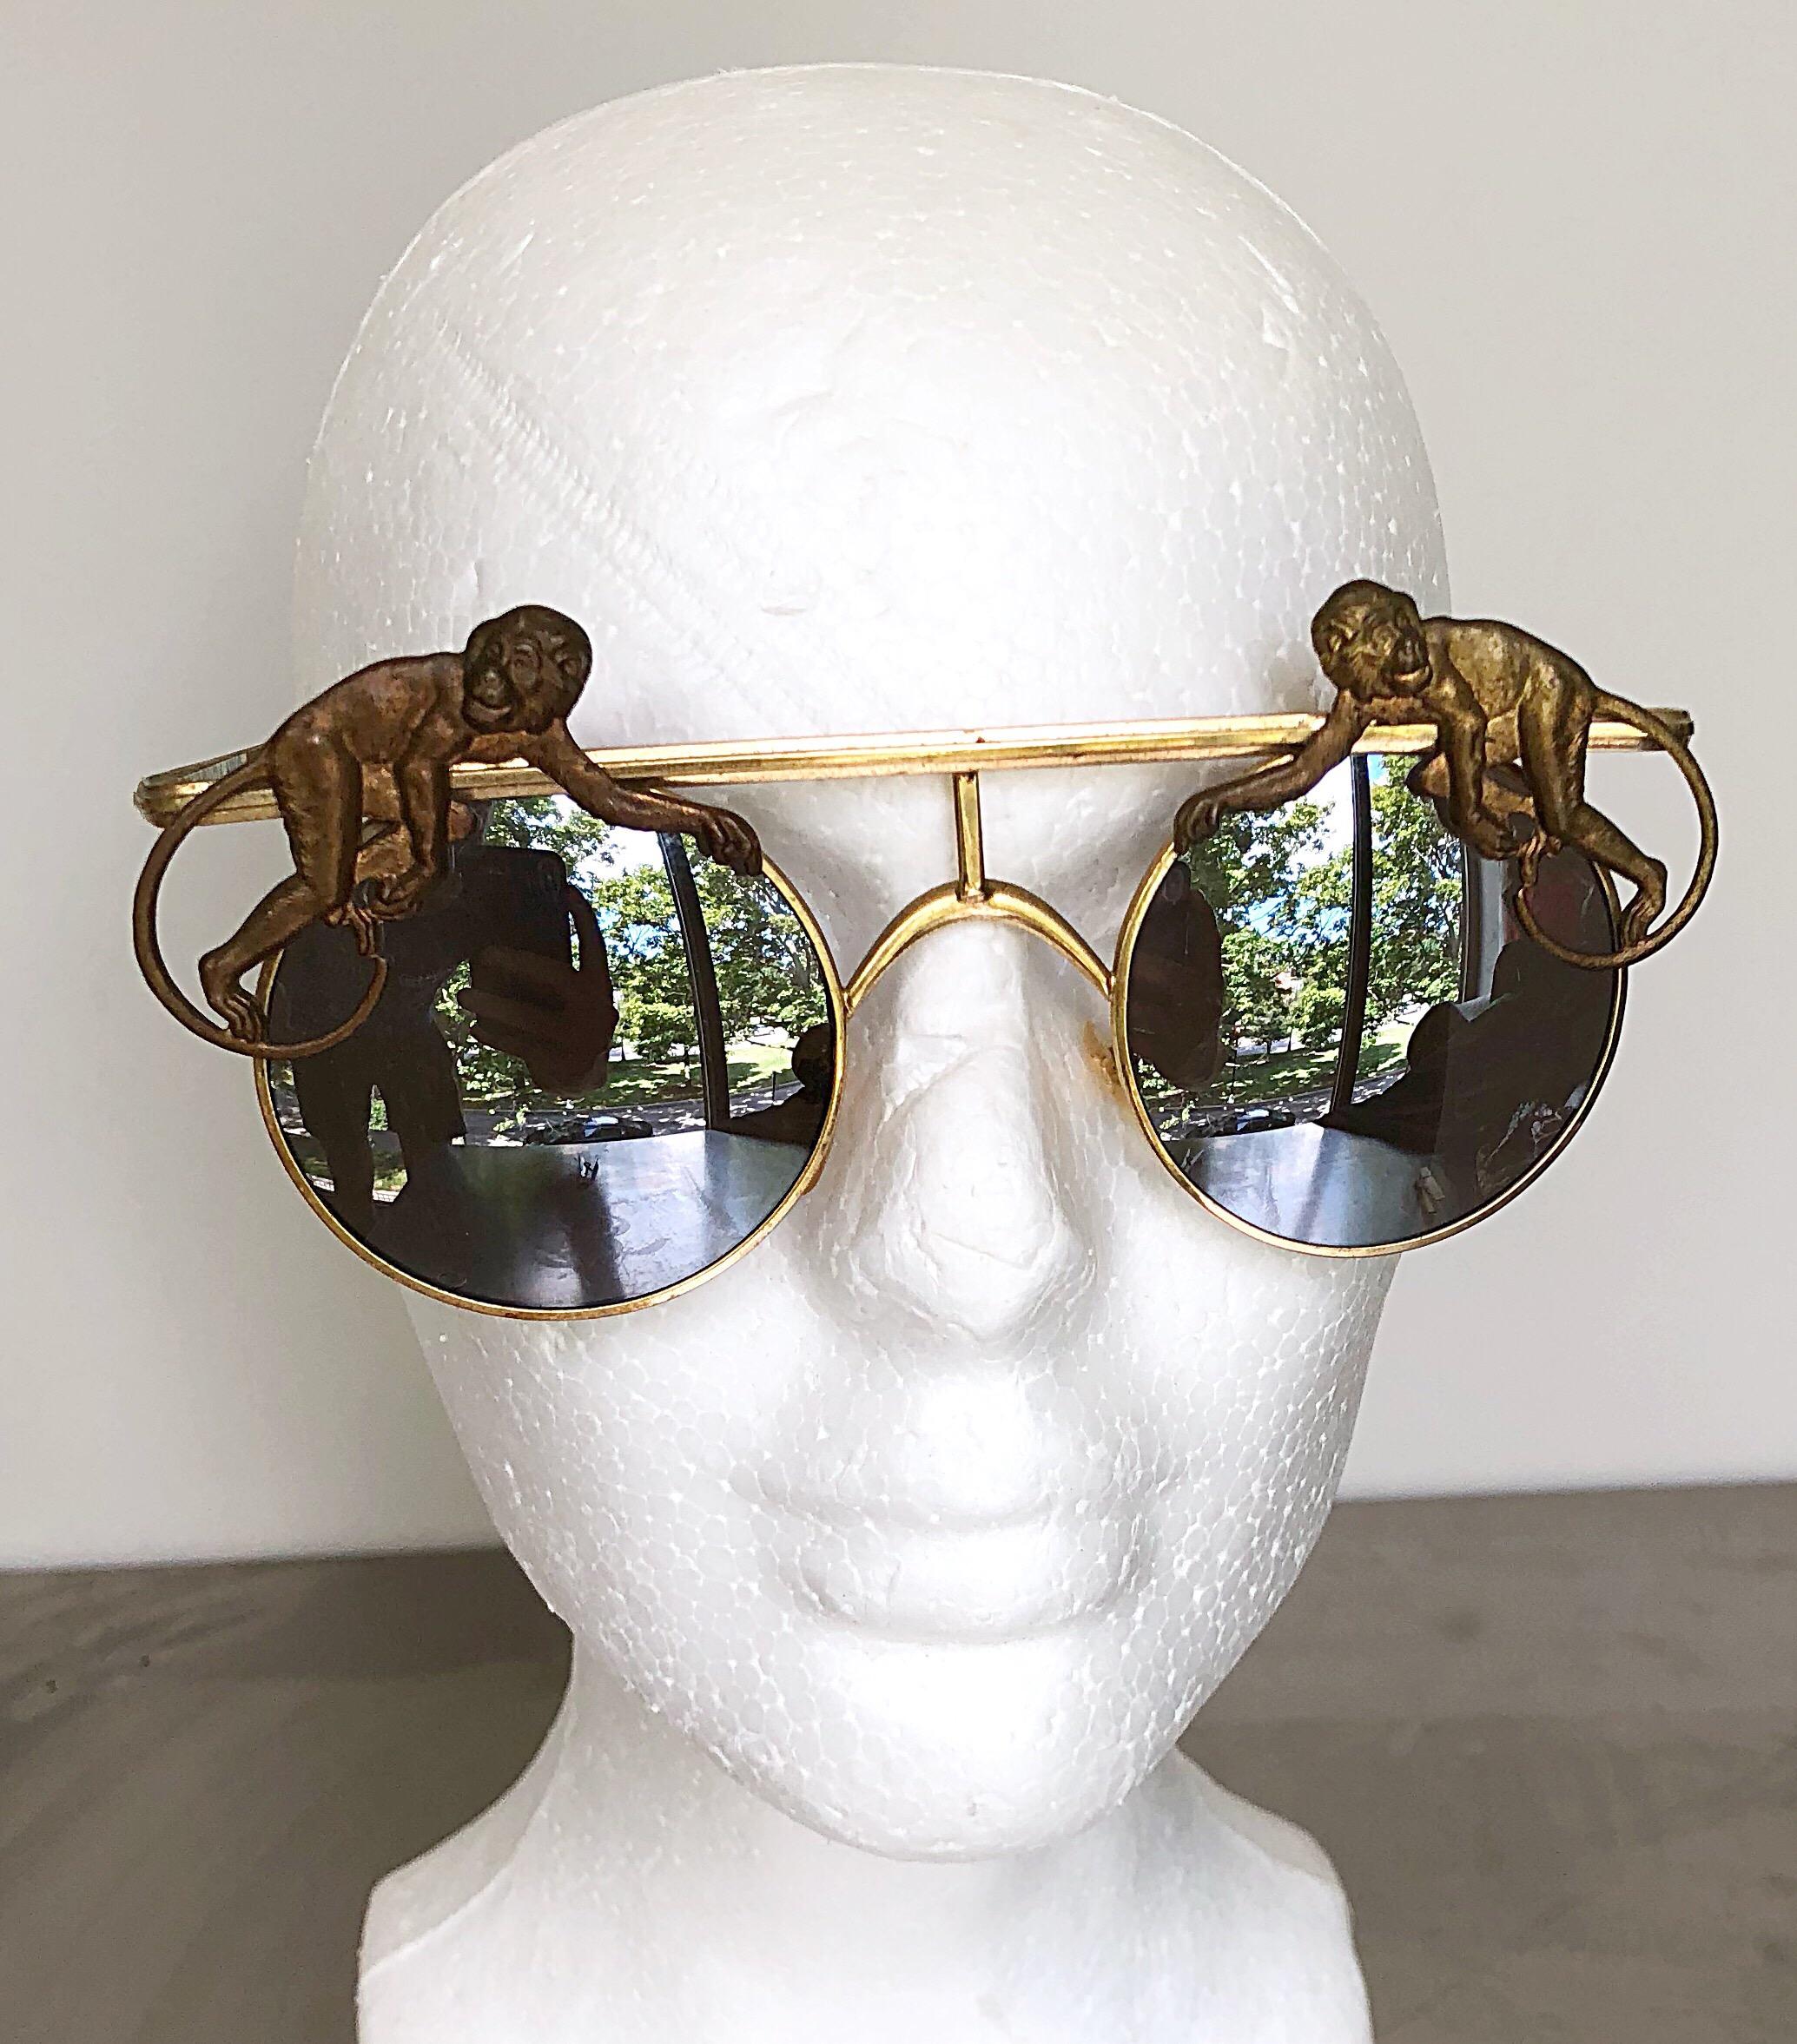 I have had these rare vintage MERCURA unisex sunglasses once before, and they sold instantly! Imagine my excitement when I found them again! Features gold rims with a brass monkey at each temple. Make a statement while protecting your eyes! In great